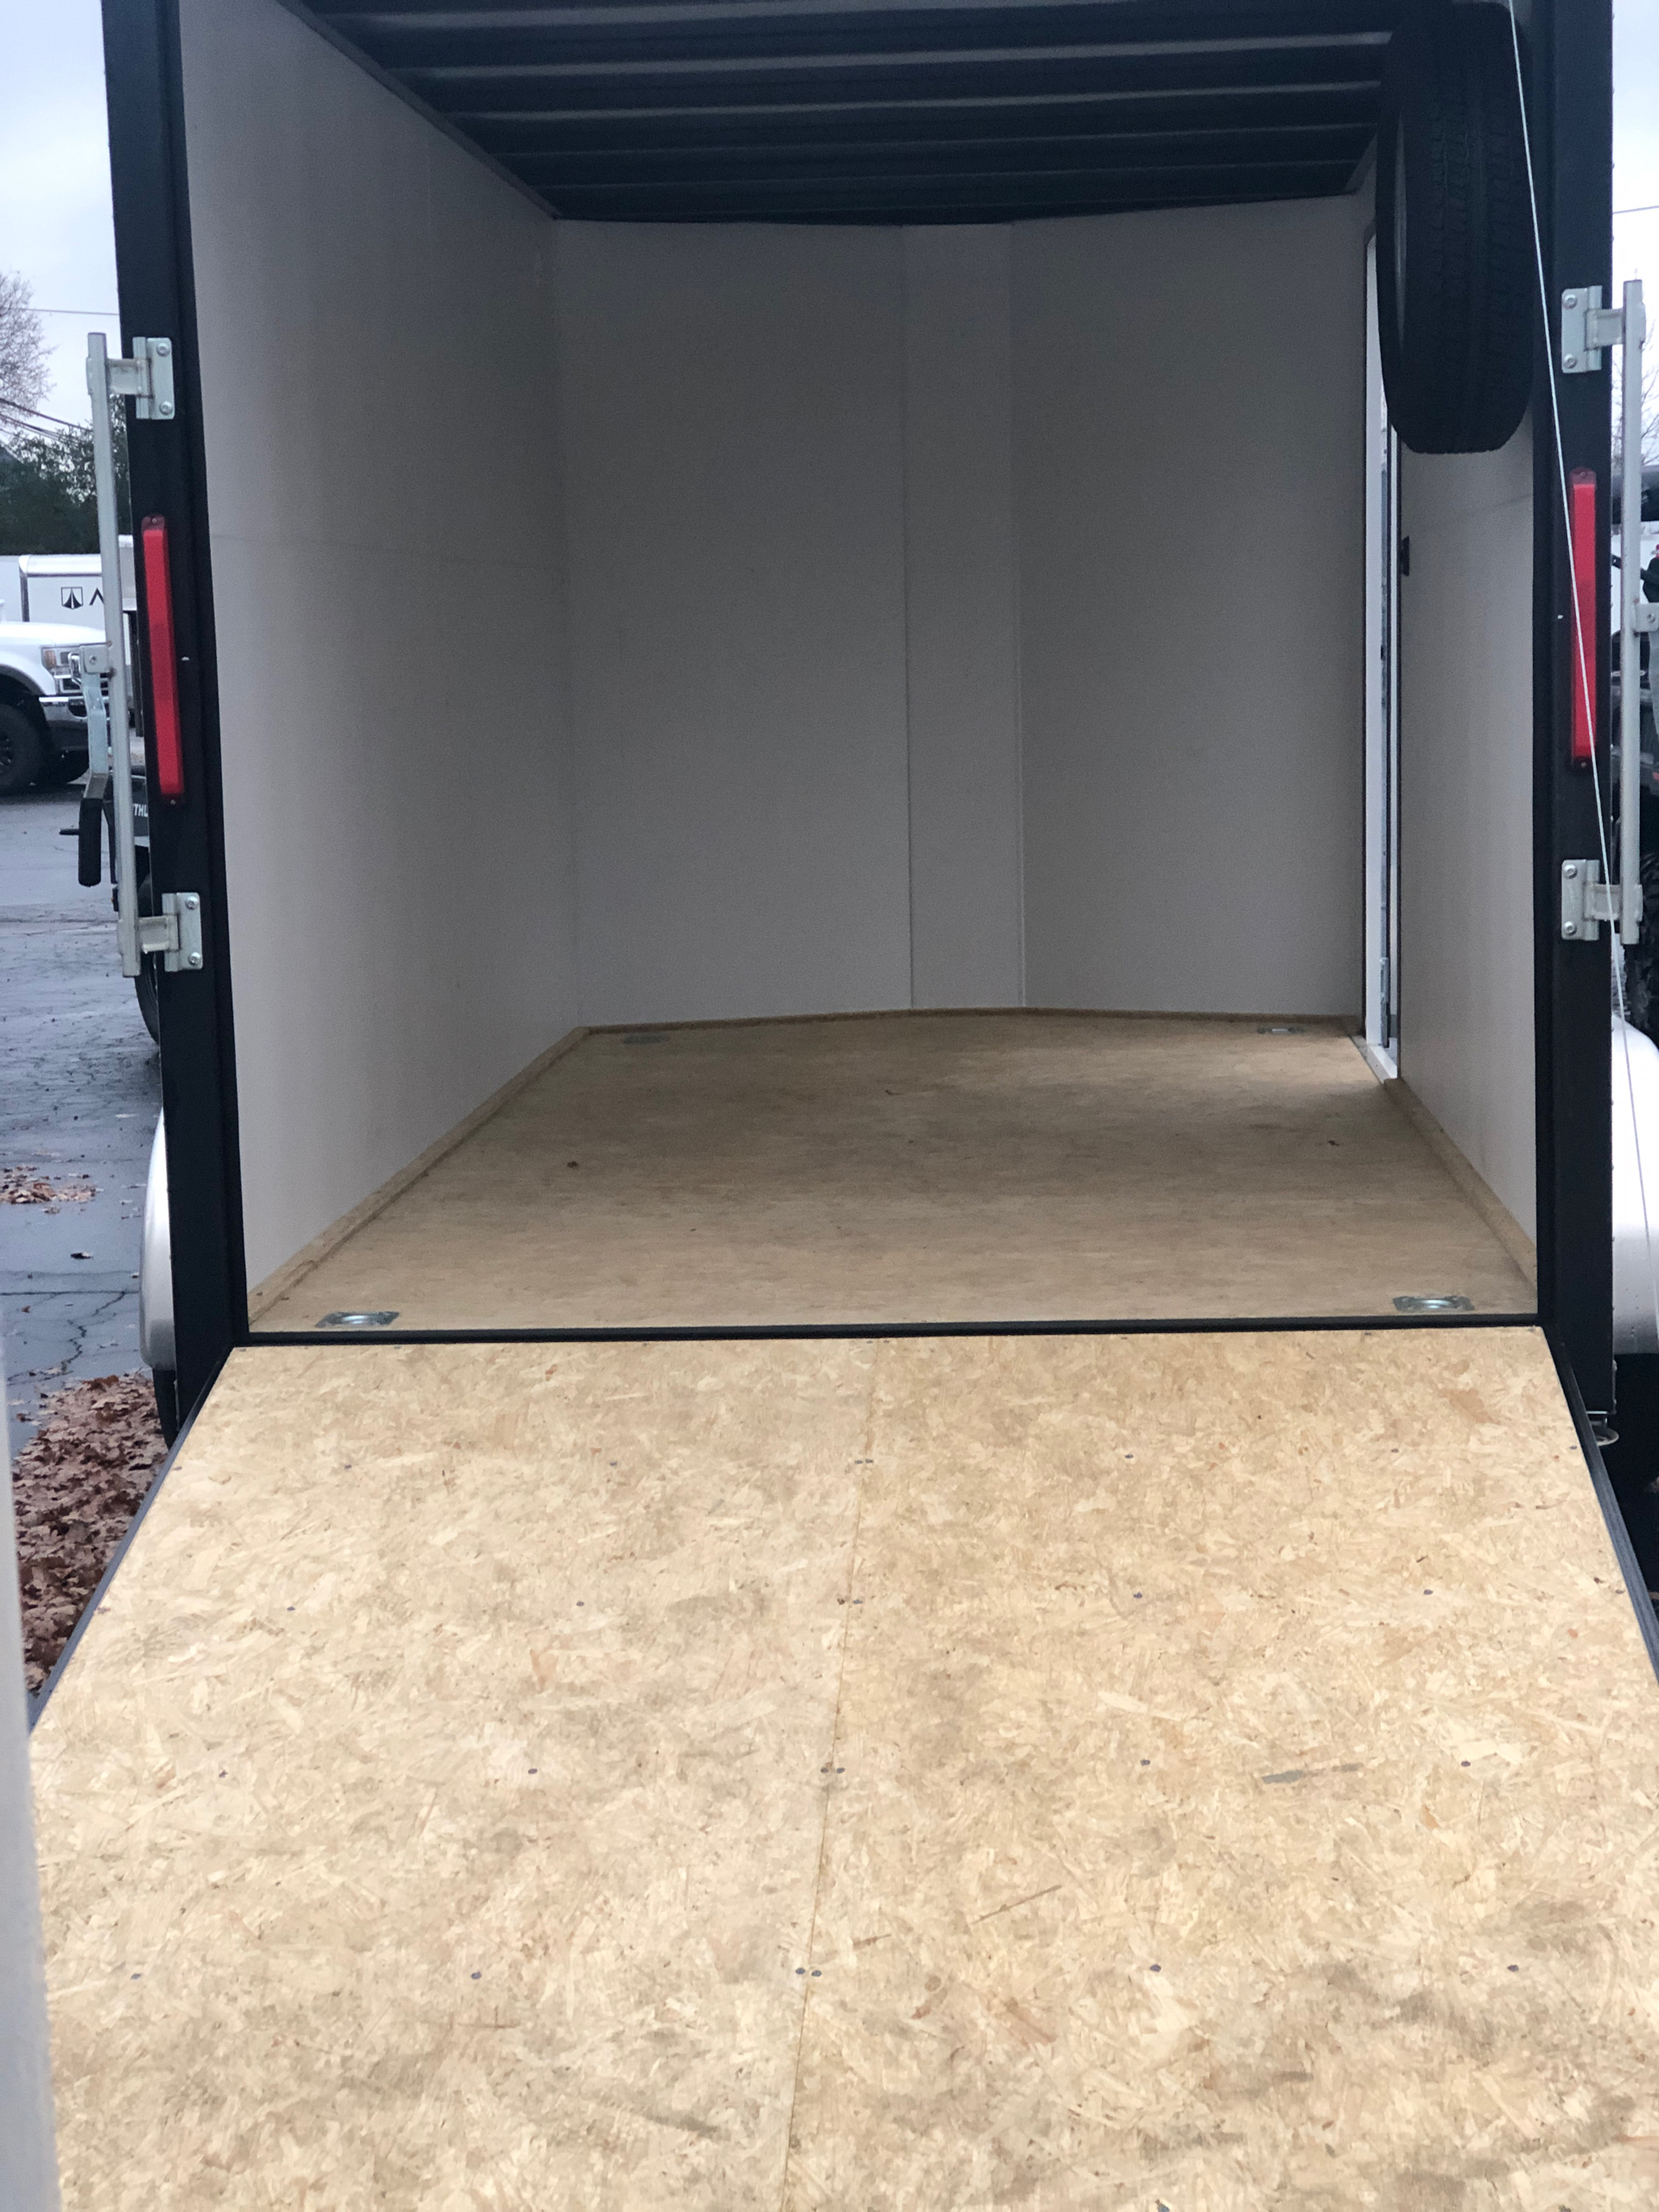 2022 Charmac Trailers 7X14 STEALTH CARGO V-NOSE in Redding, California - Photo 5